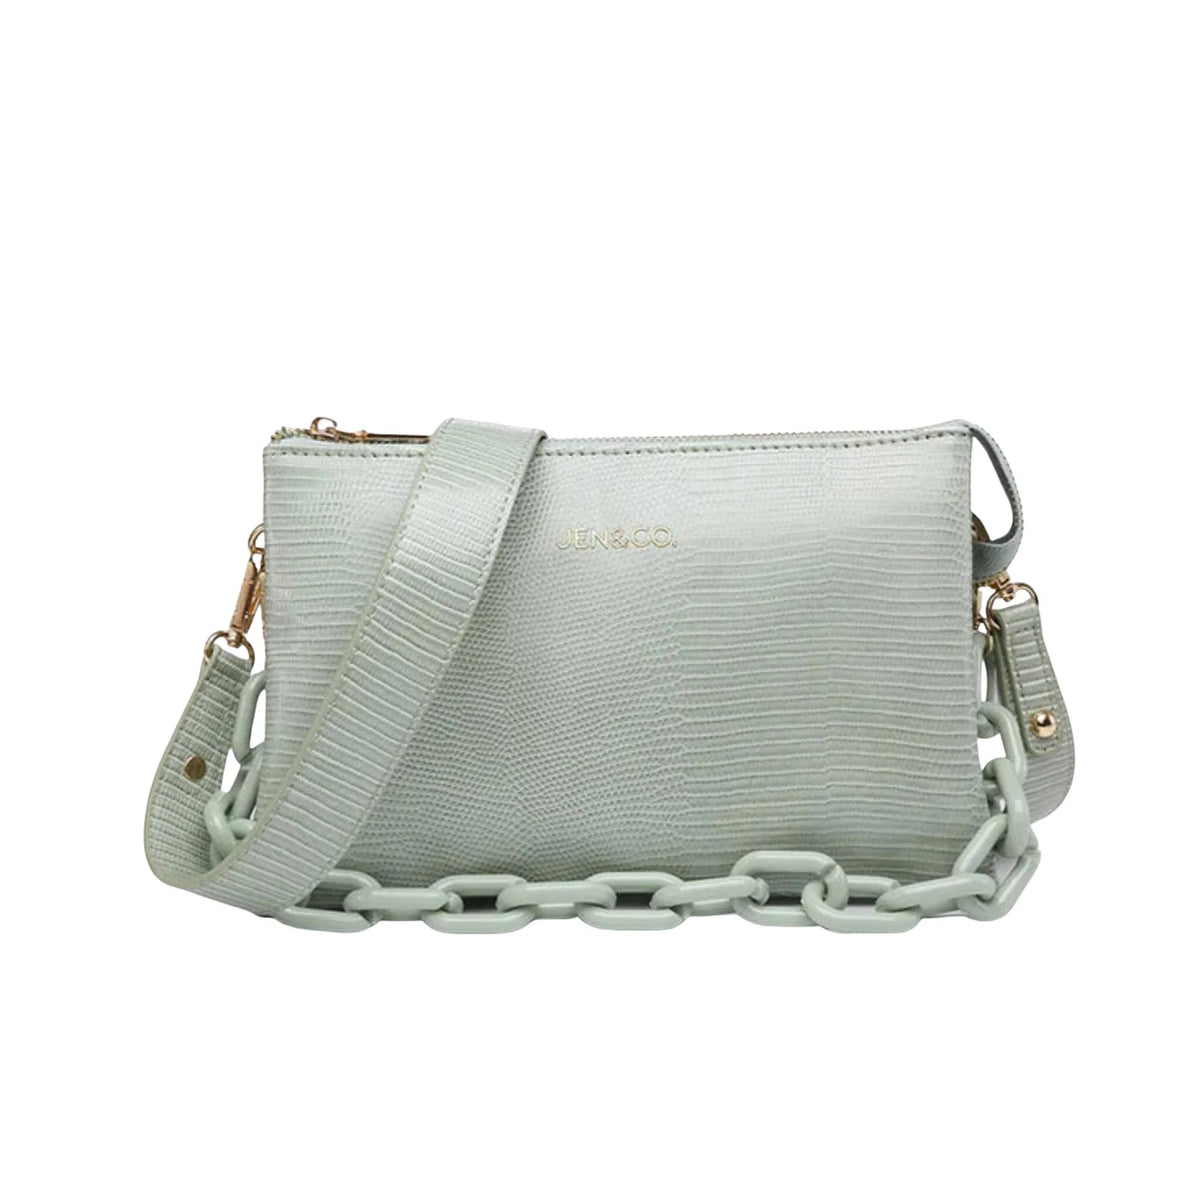 izzy lizard crossbody bag with chain strap in pale teal